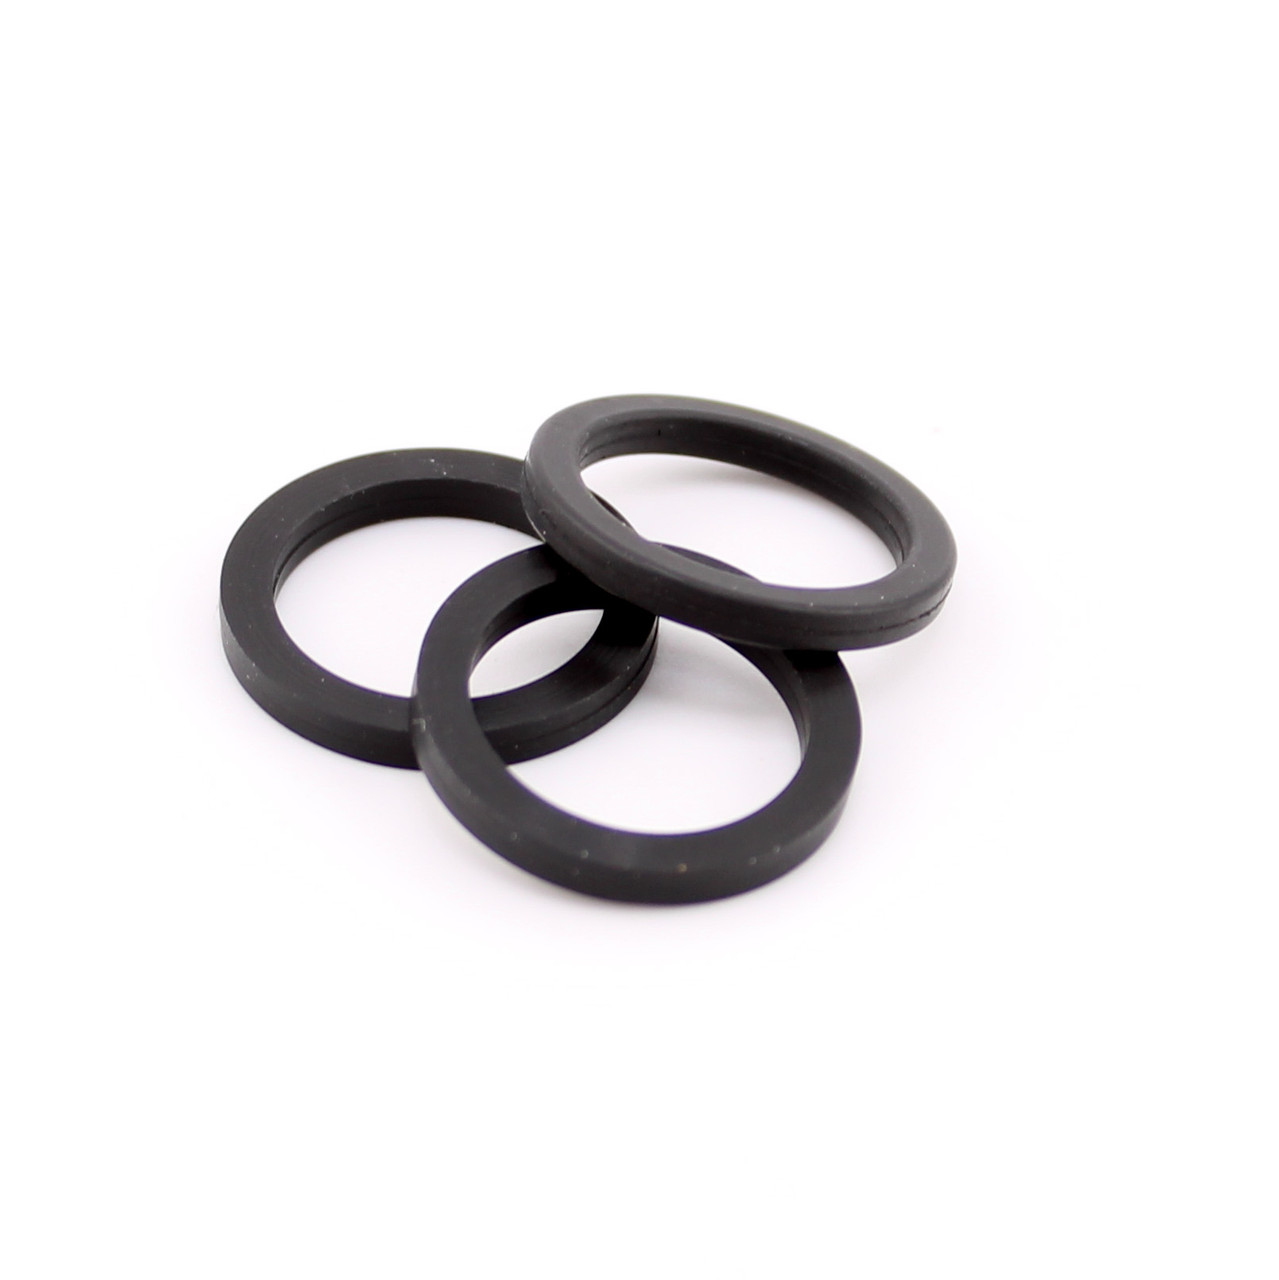 uxcell Nitrile Rubber O-Rings 12mm OD 6mm ID 3mm Width, Metric Sealing  Gasket, Pack of 10: Amazon.com: Industrial & Scientific